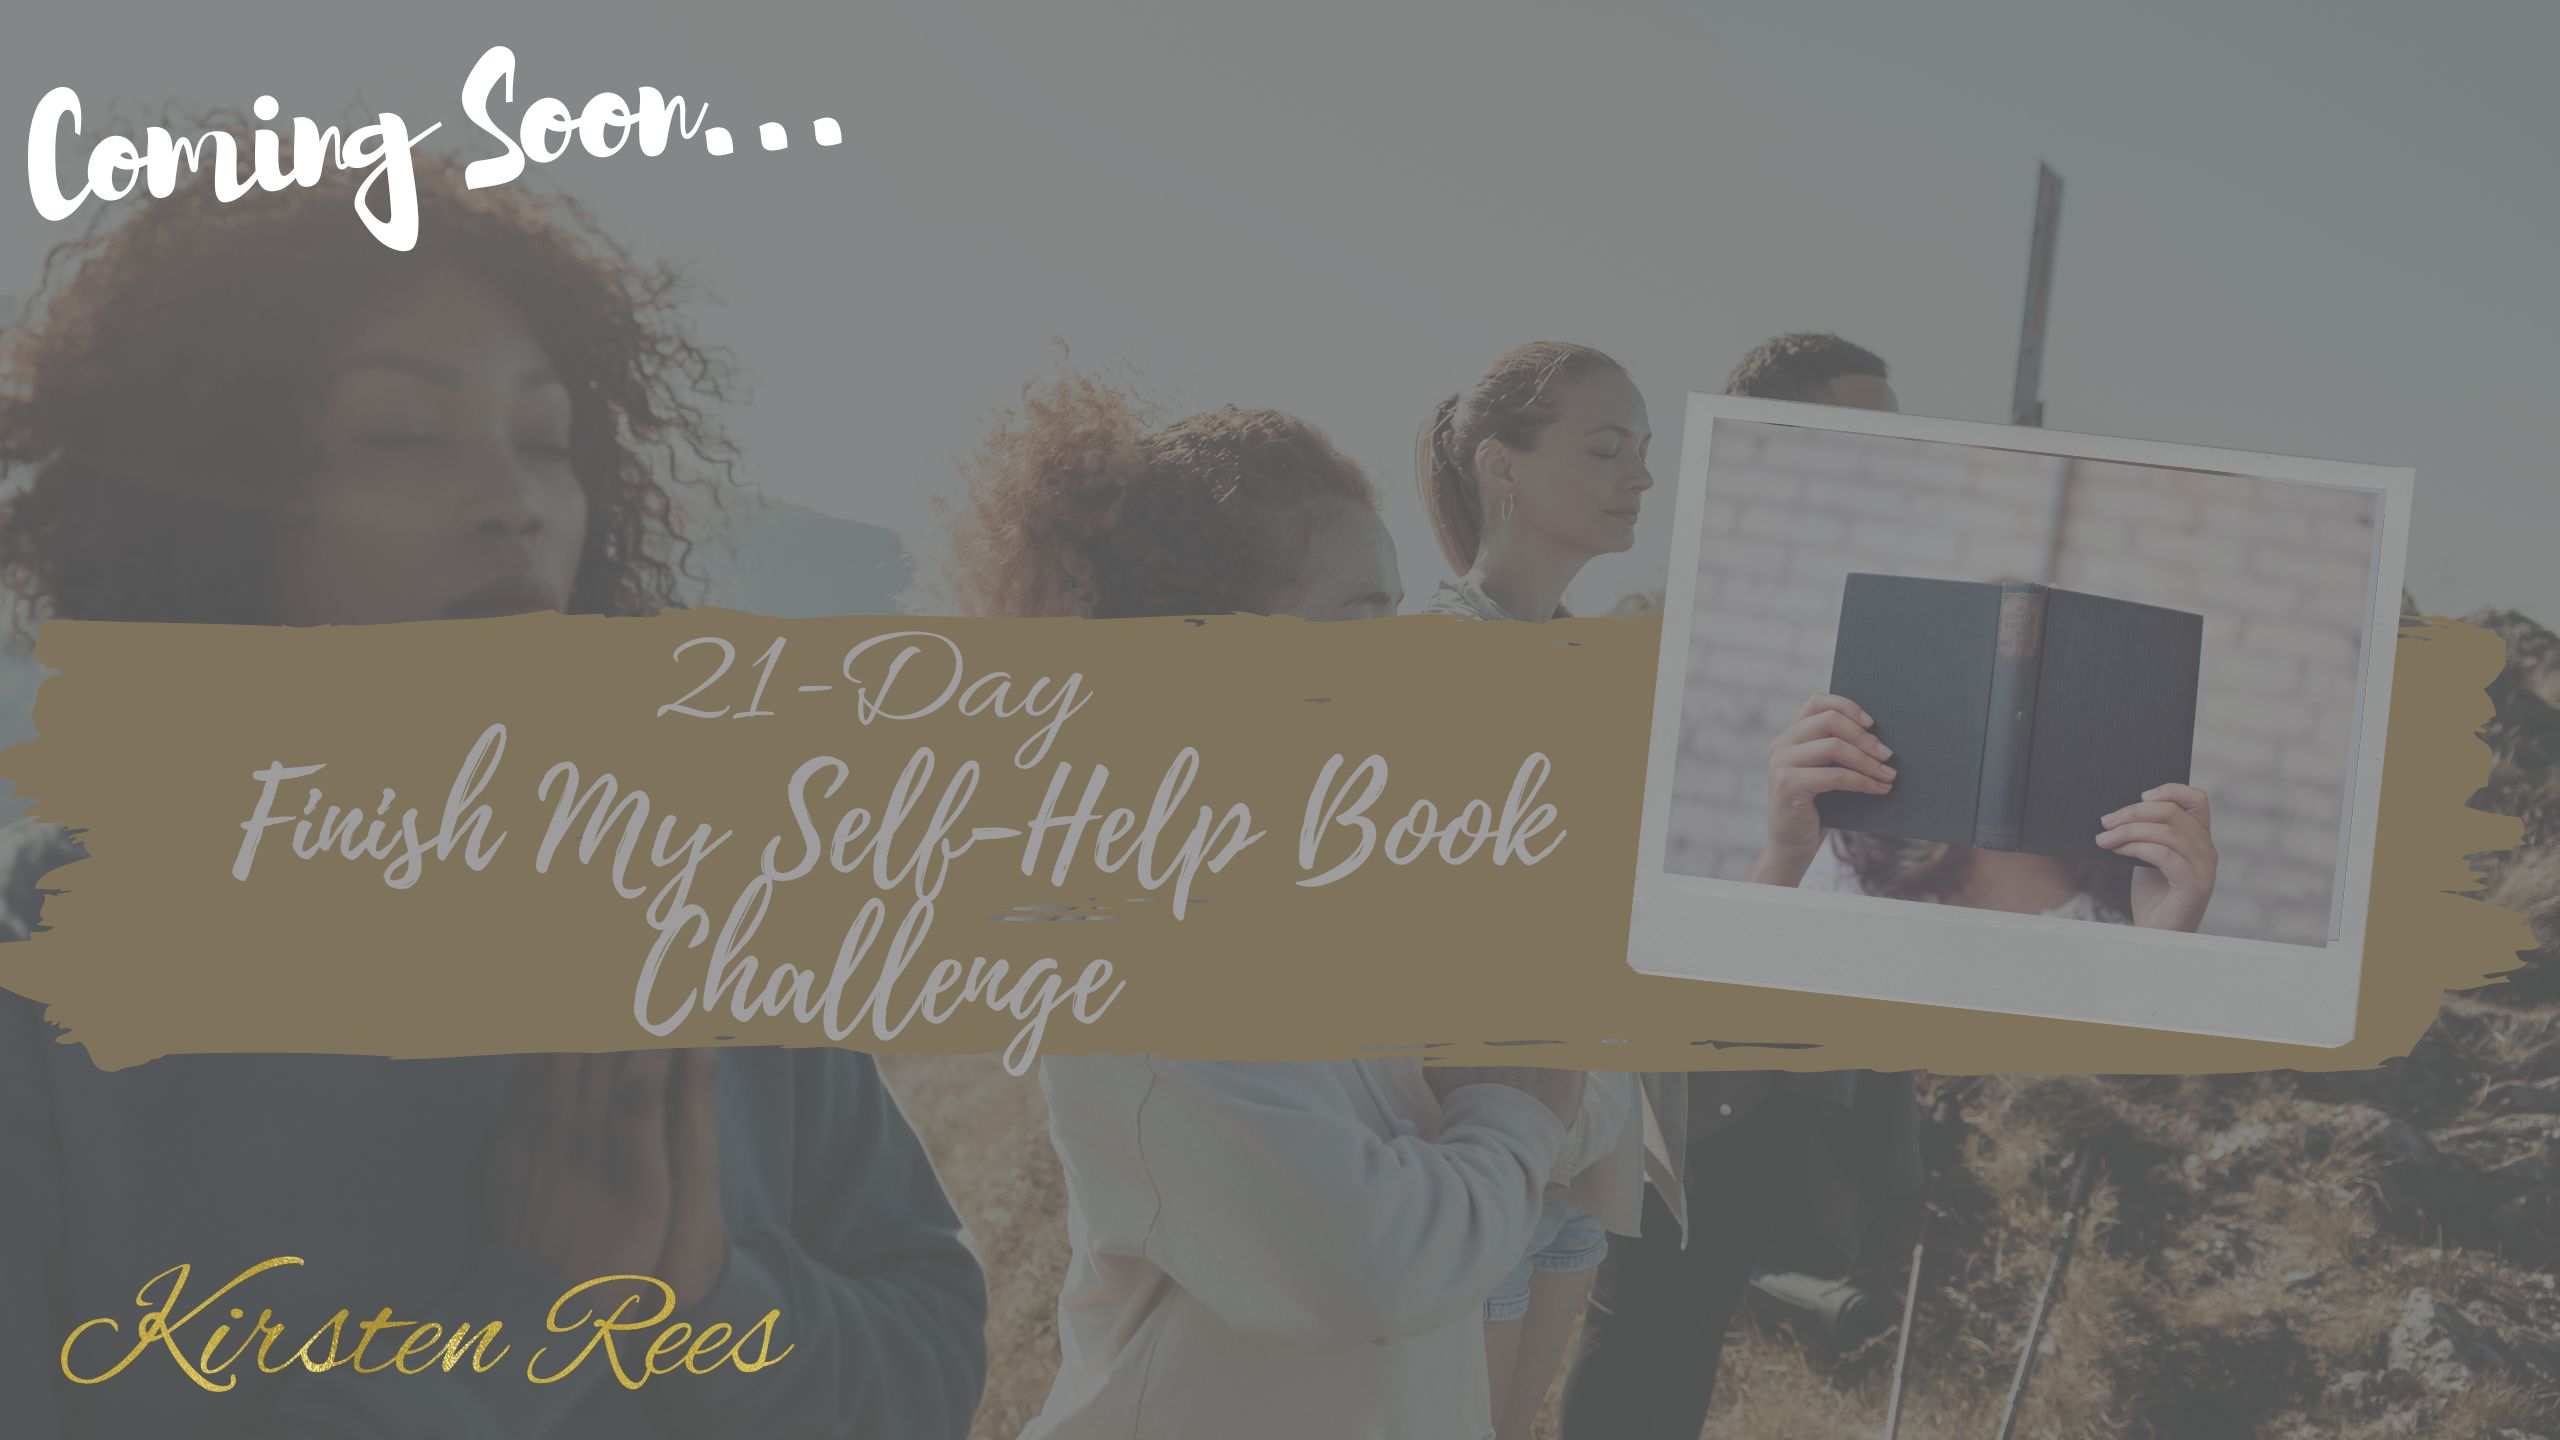 How to Finish my Self-Help Book. A 21-day email mini course by professional Book Editor, multi Award-winner, Writing Coach, and Published Writer, Kirsten Rees.